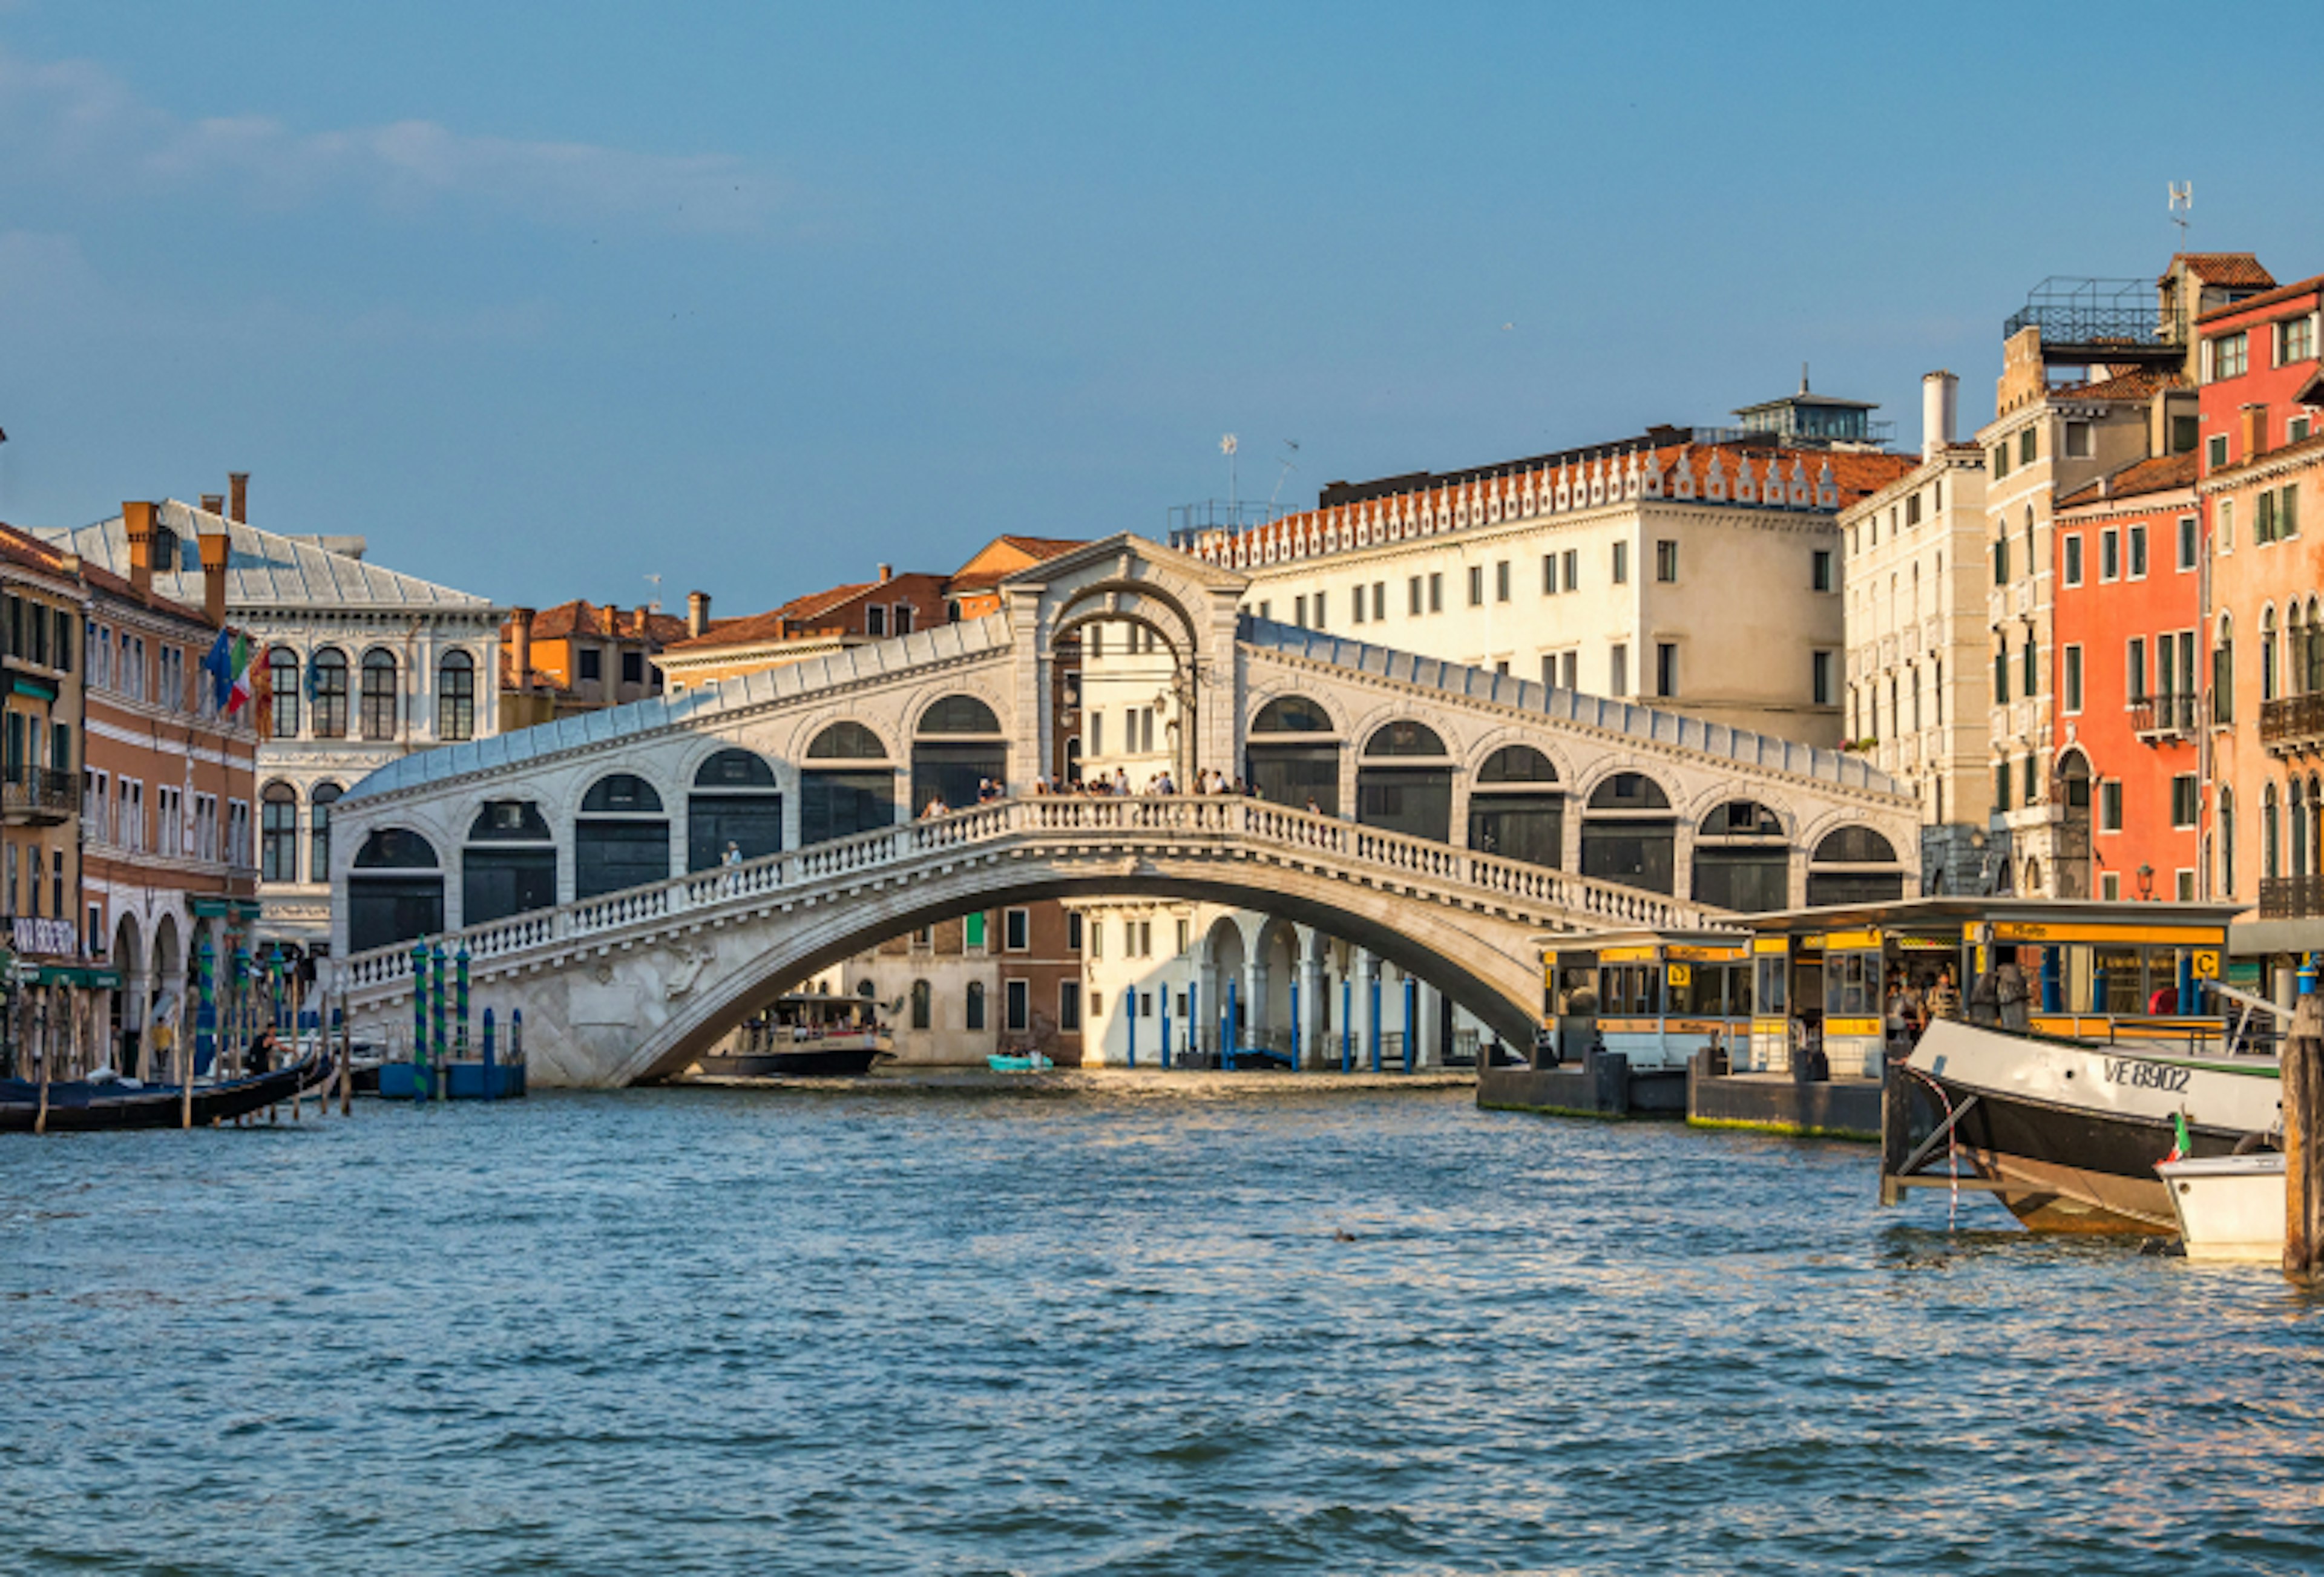 Rialto bridge and Grand Canal in Venice, Italy. Architecture and landmarks of Venice